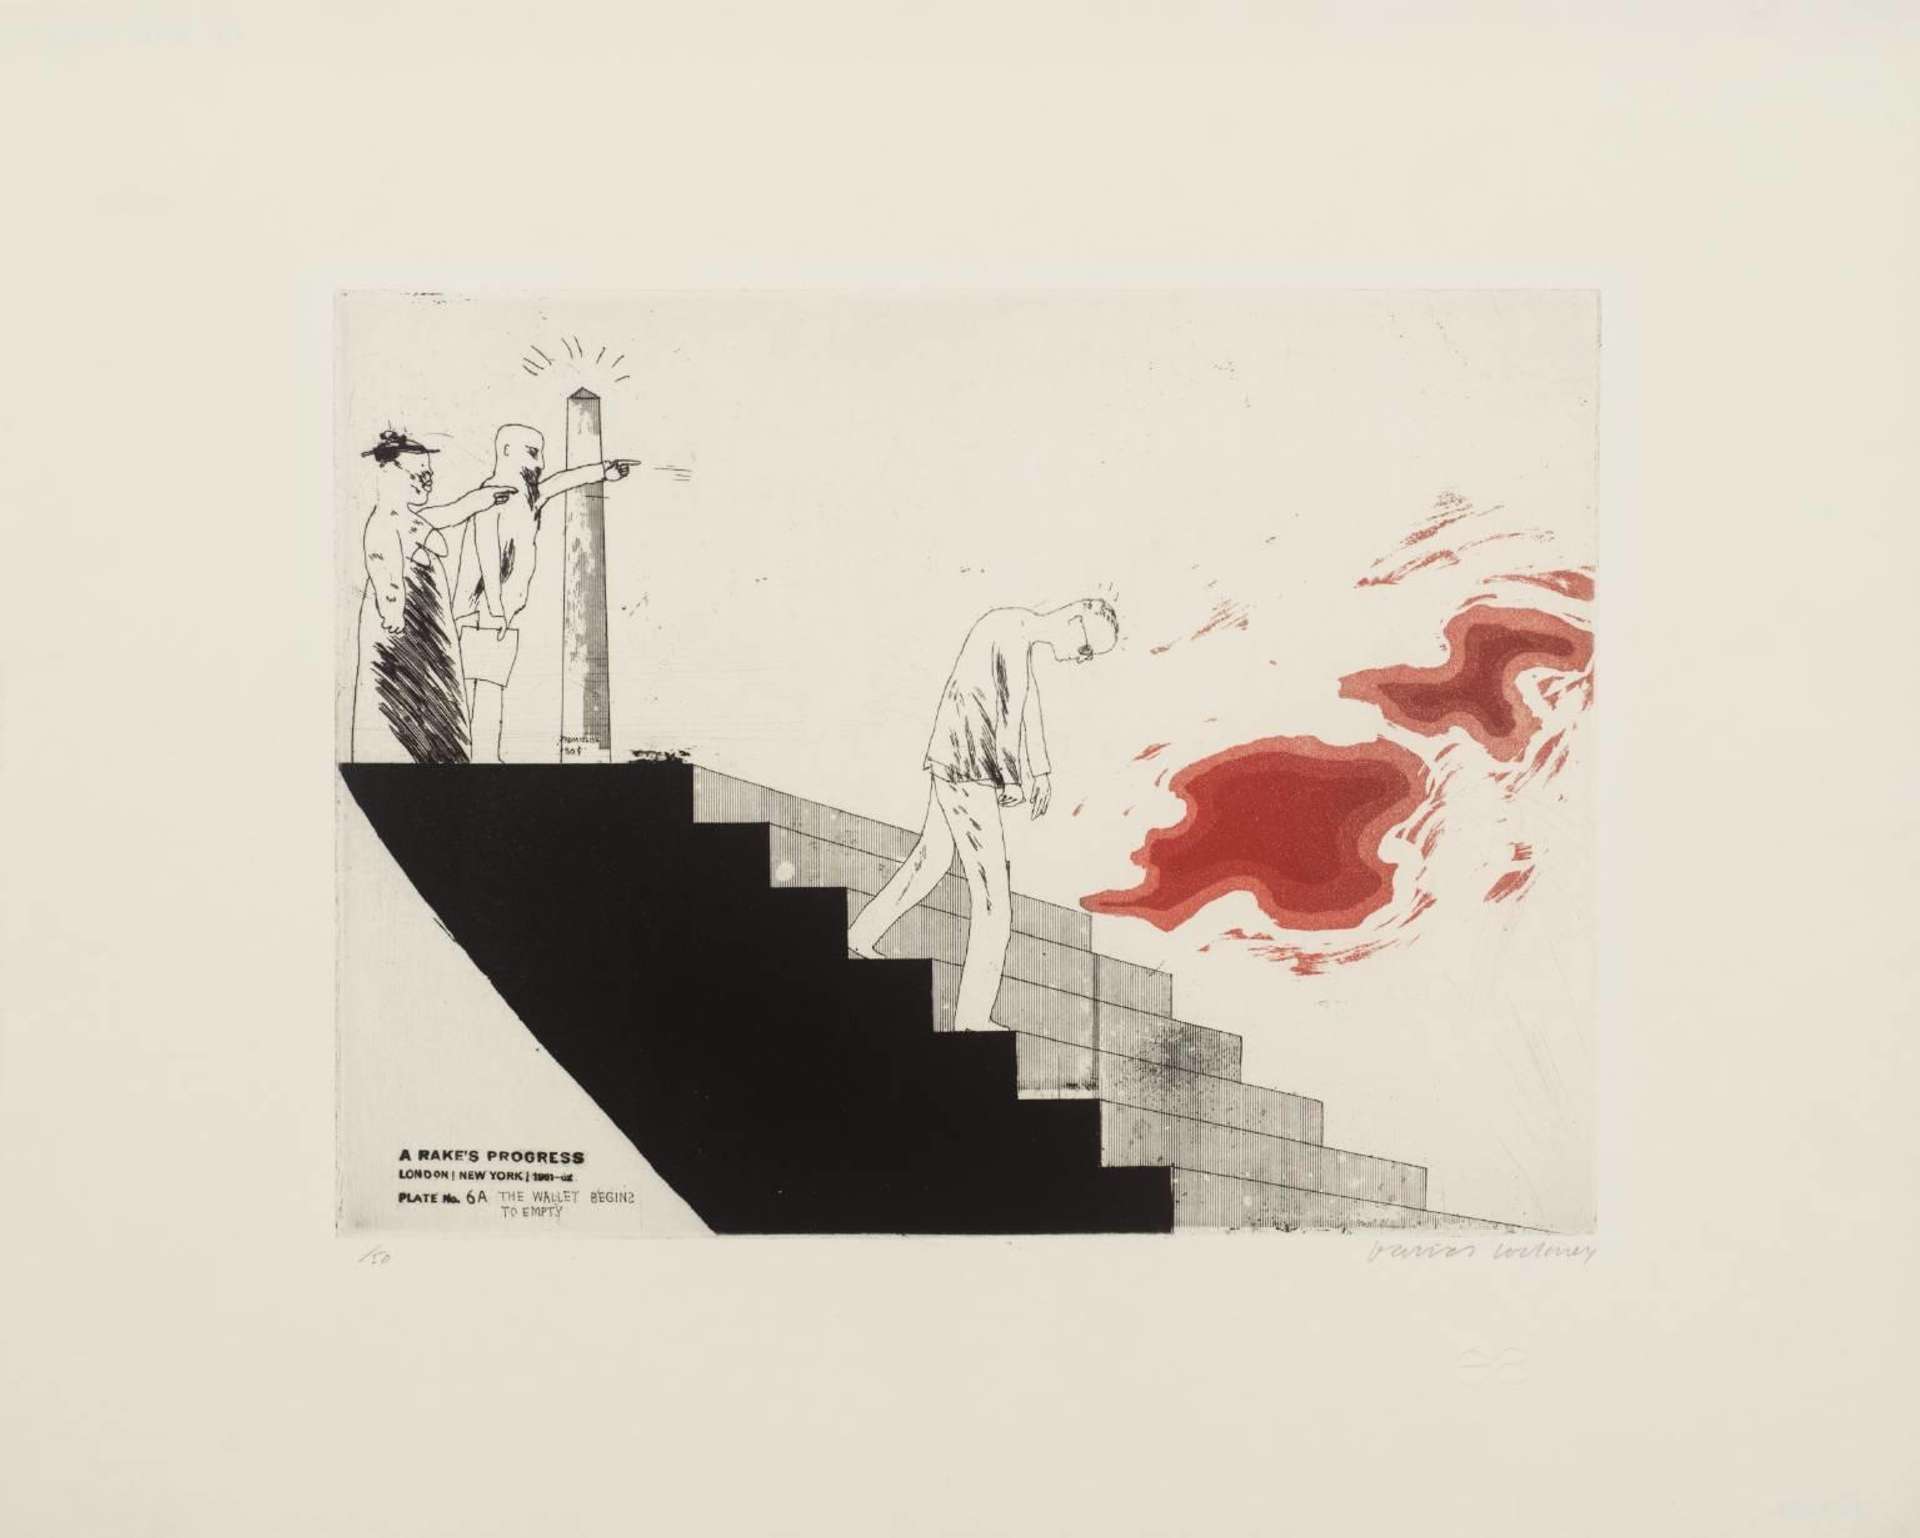 David Hockney’s The Wallet Begins To Empty. An etching of a man walking down the stairs, away from two other people pointing at him from above the stairs with red accents in the sky.